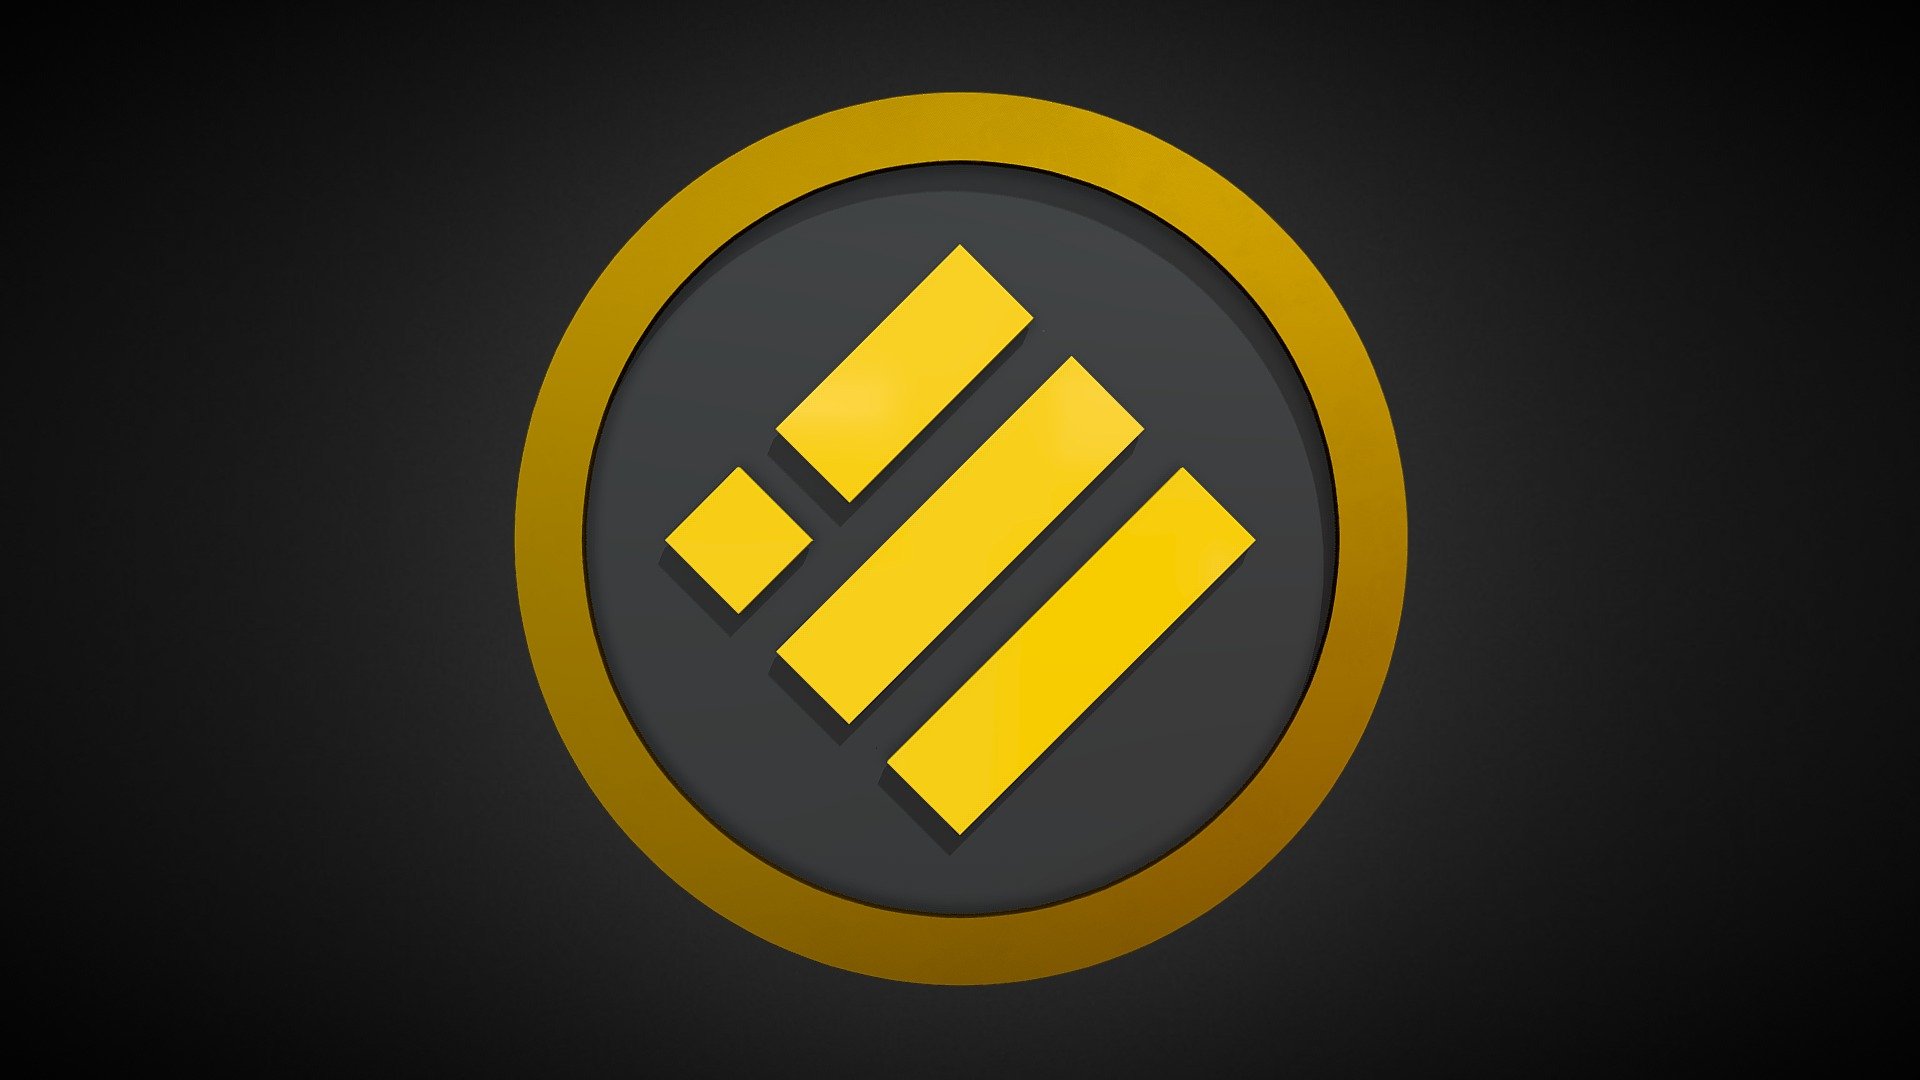 Blender file and texture folder included
FBX file has textures embedded into it

The Binance logo, icon or coin made 3D. Similar with the first Binance Logo but this is the USD version.

The textures are Glossy Plastic yellow, Matte Plastic dark grey, and Aluminum yellow

I gotta sell these to make a living. and $3.99 is as low is this site can take me 3d model